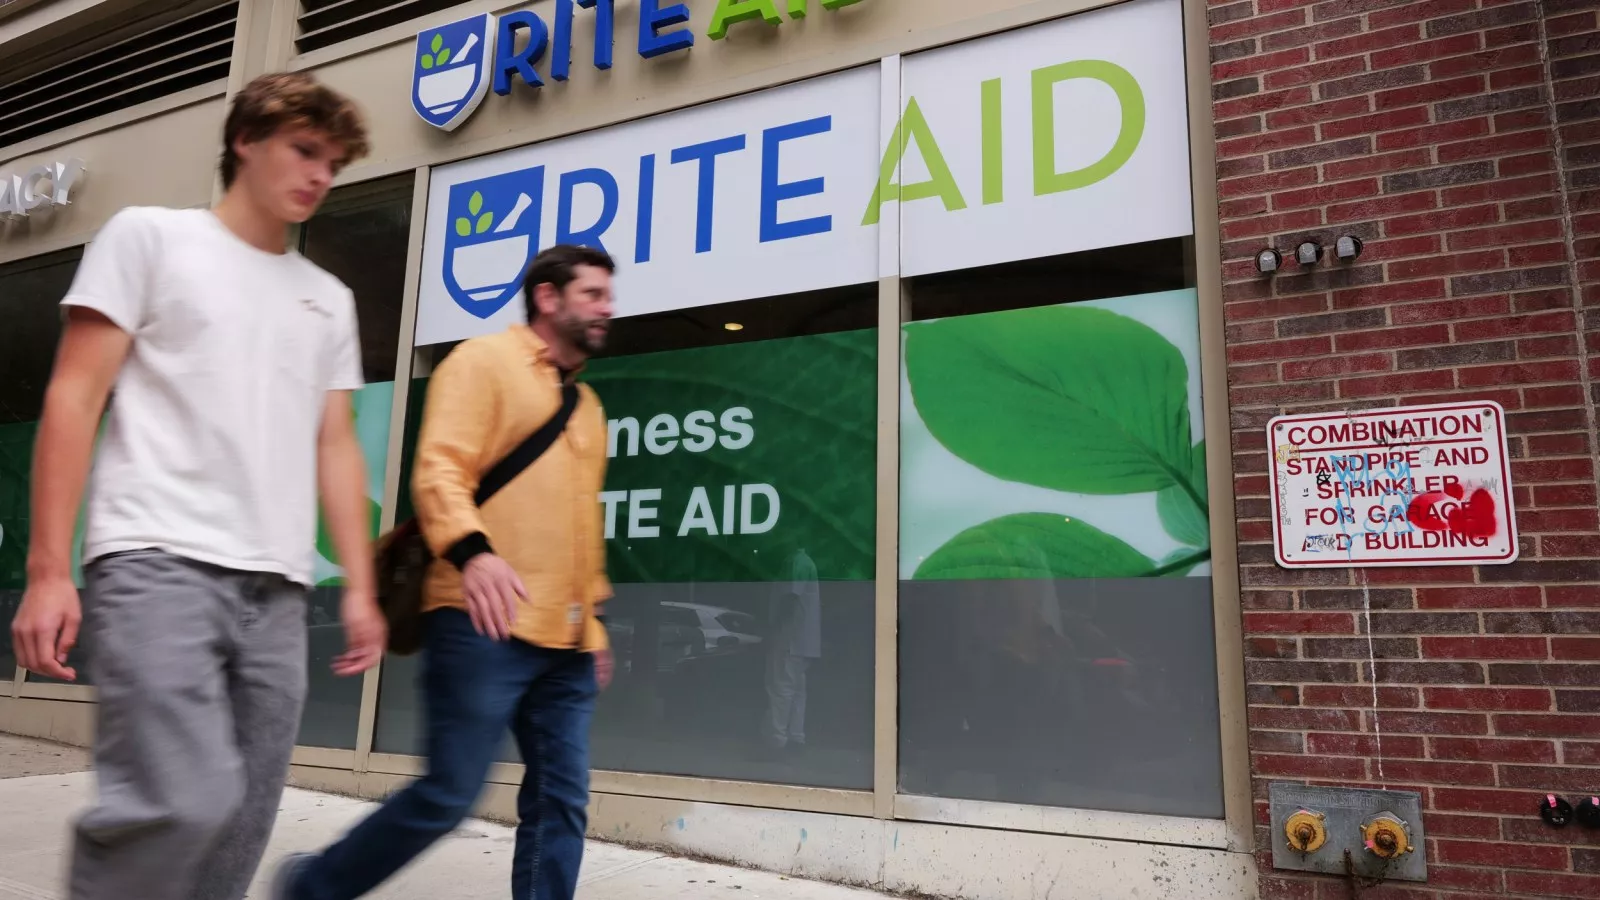 Rite Aid Bankruptcy Explained: Three Reasons Why Pharmacy Giant Failed